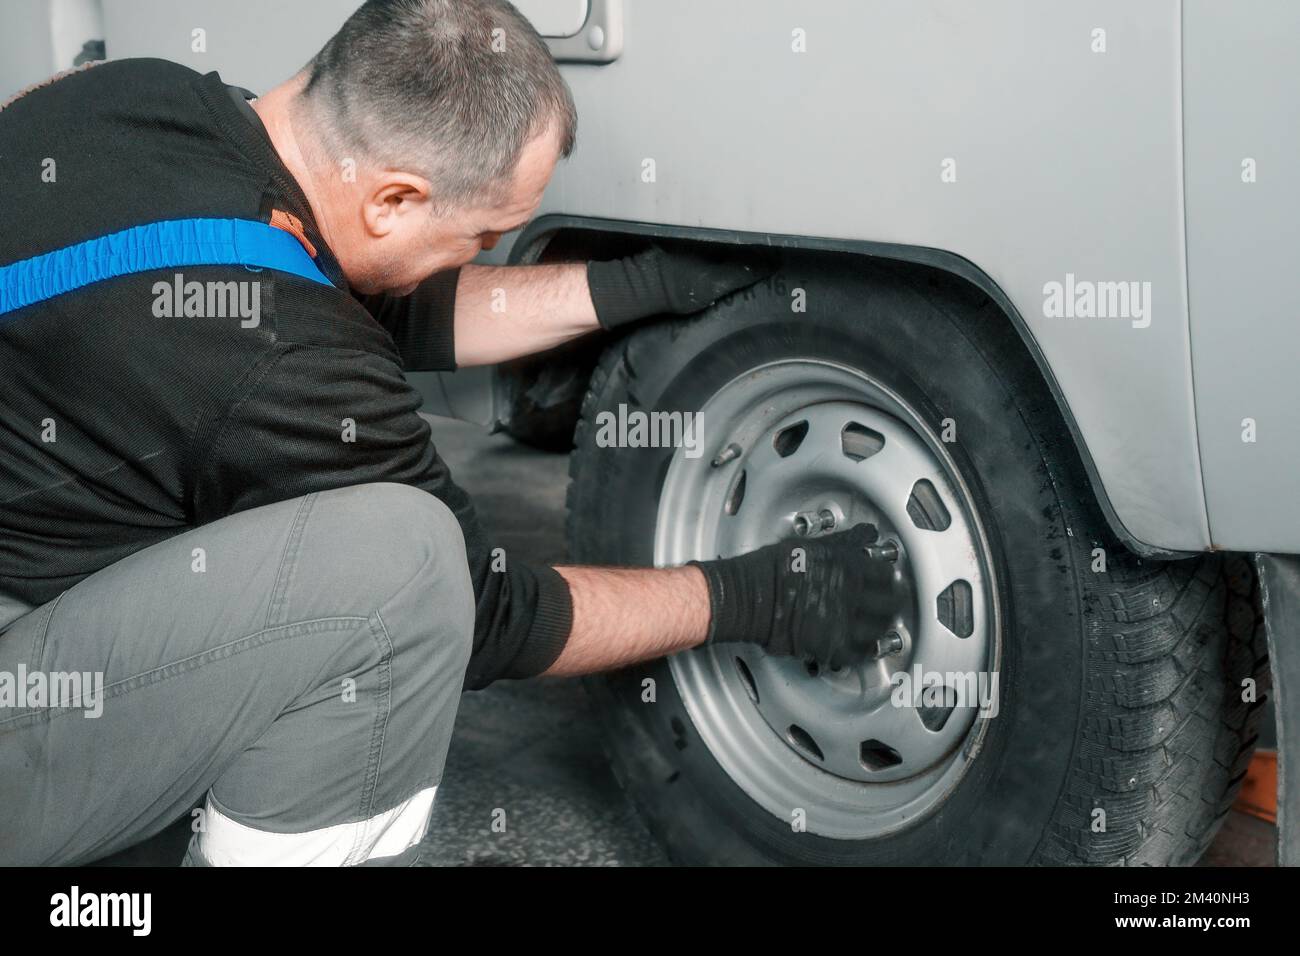 Man changes wheel of car in car service. Professional auto mechanic in overalls removes wheel from truck in garage. Authentic workflow.. Stock Photo